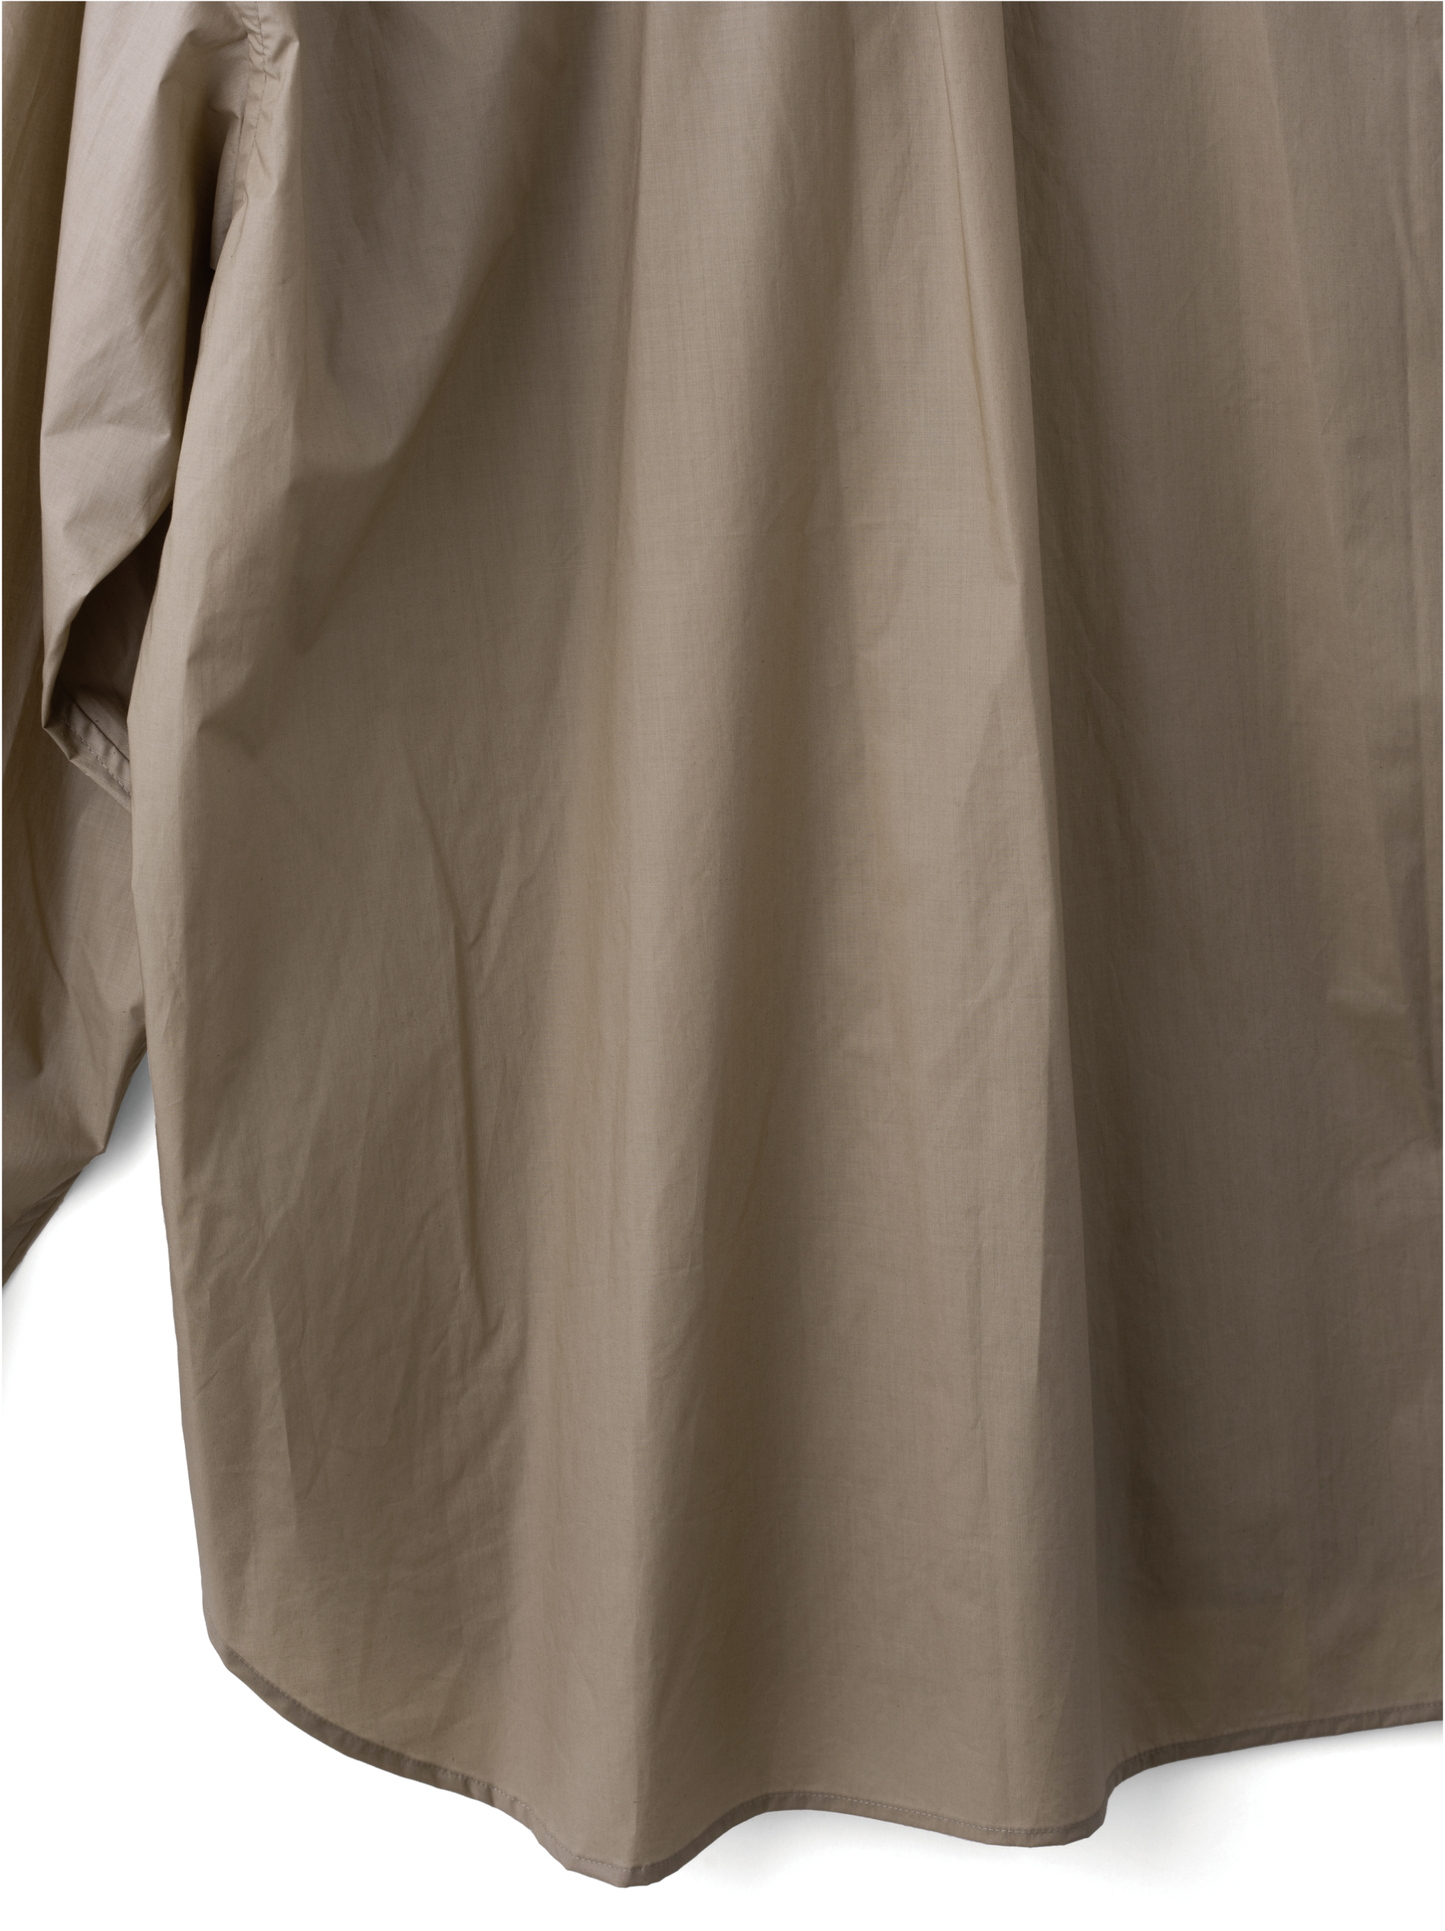 OILED COTTON SHIRTS ｜BEIGE